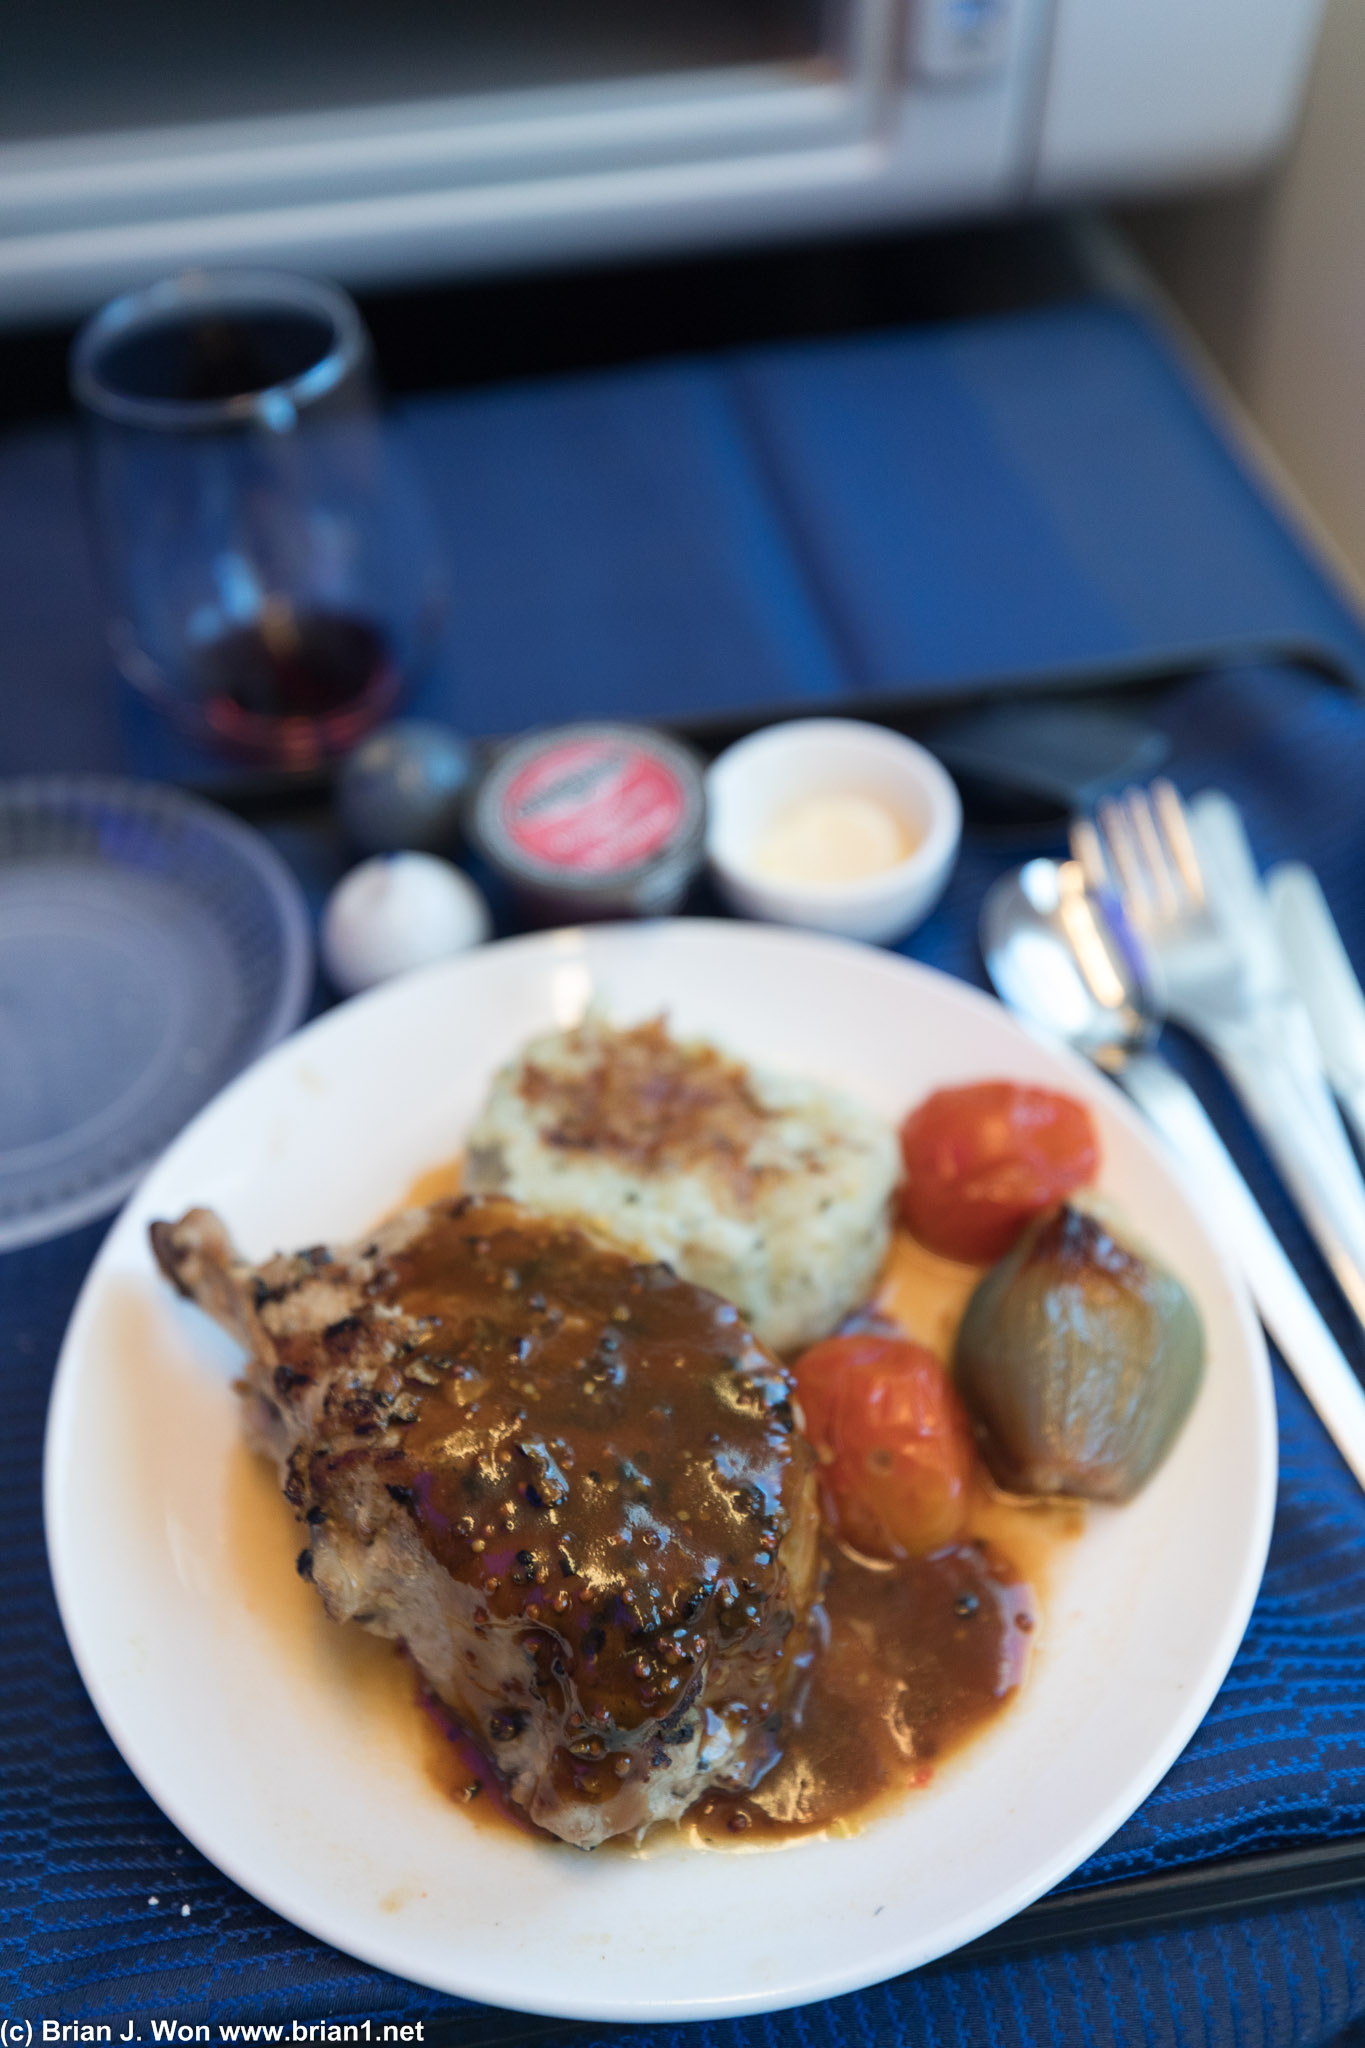 And so was the pork chop. Almost perfectly cooked-- amazing they got it right on an airplane!